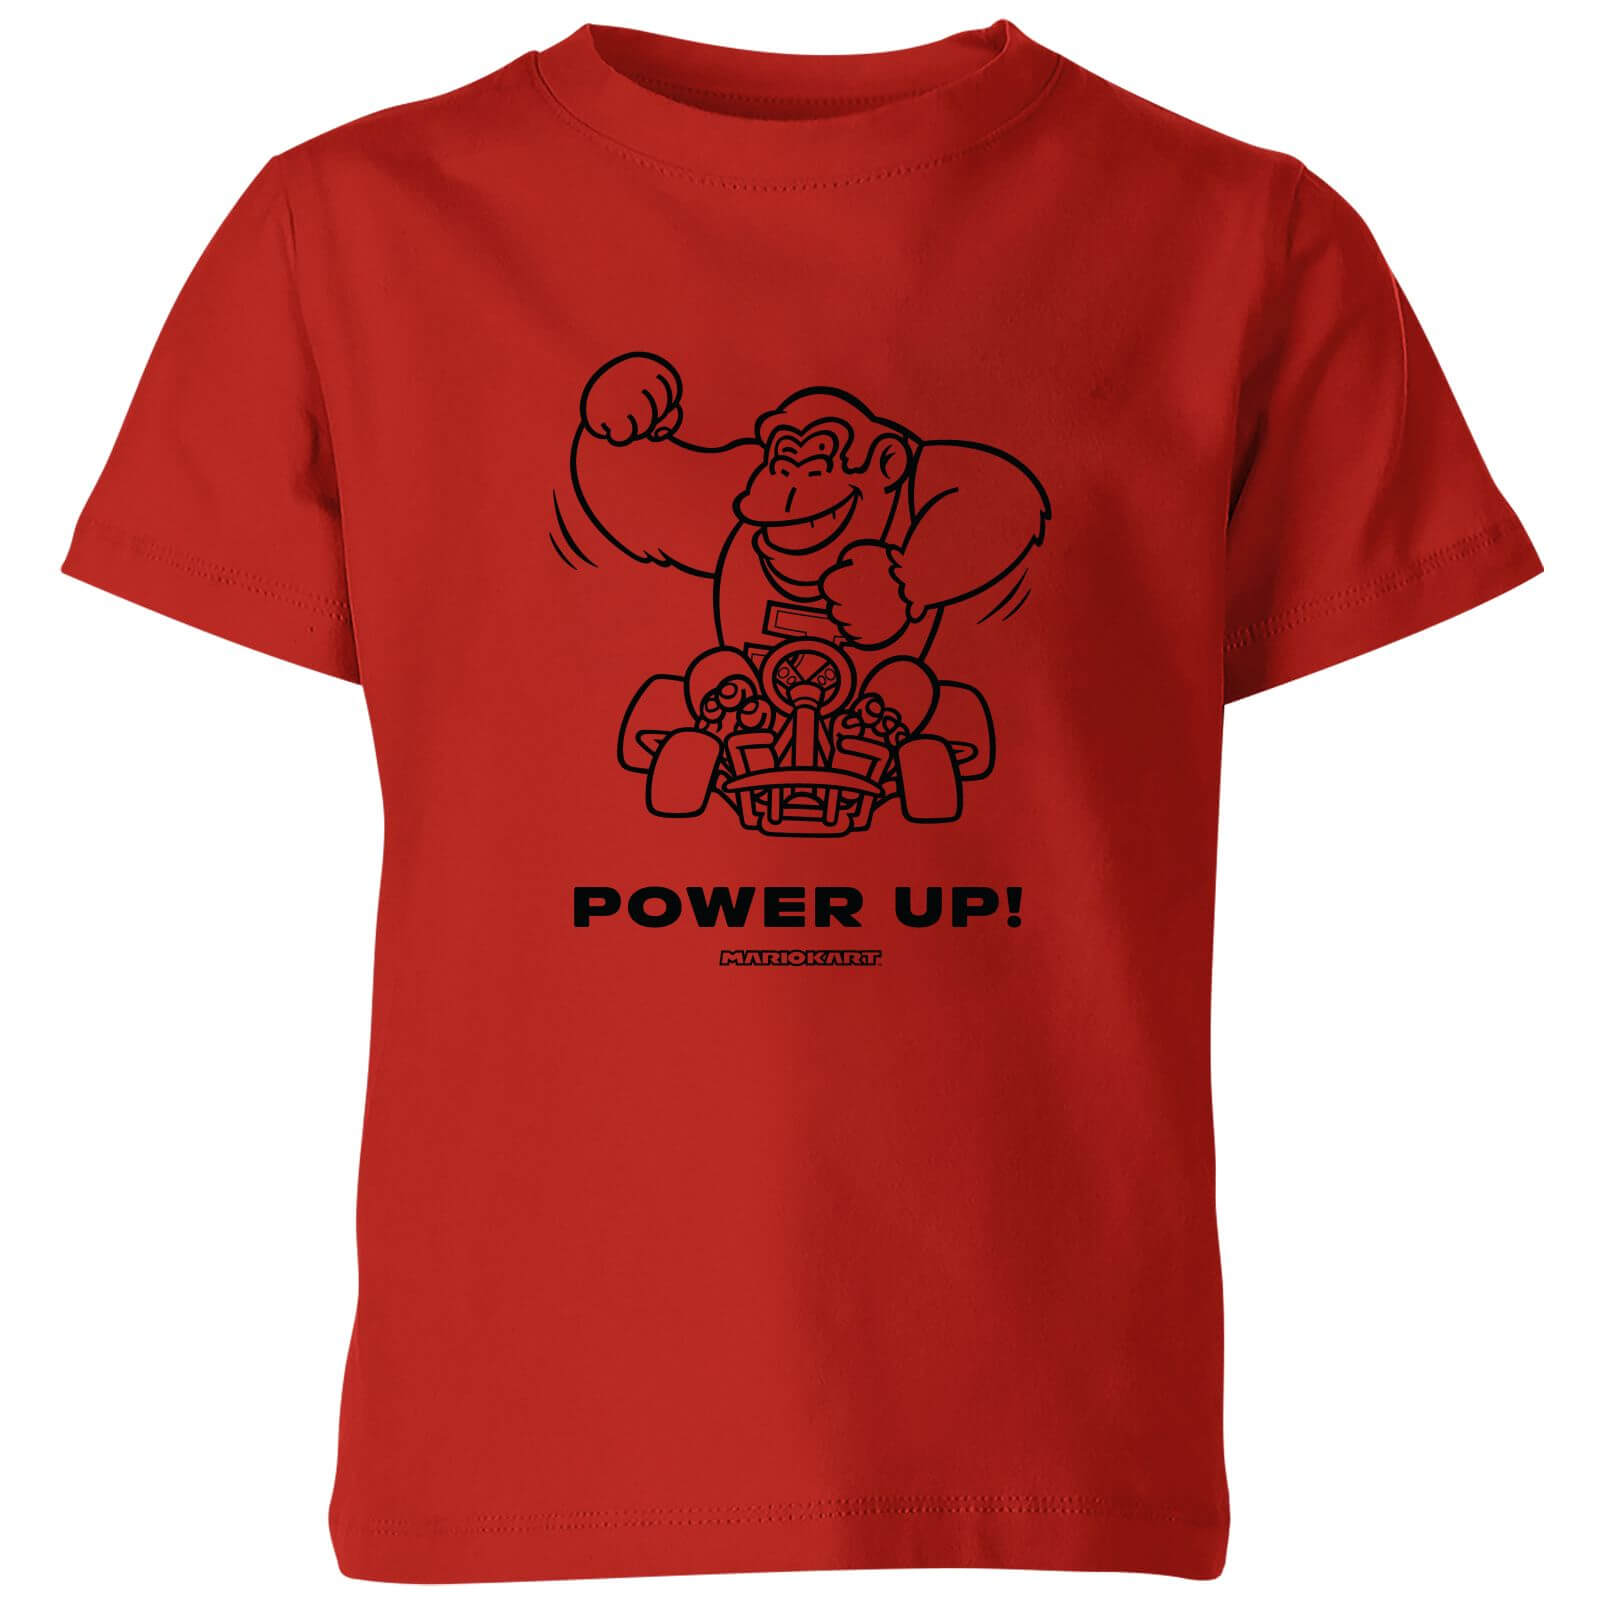 Power Up! Kids' T-Shirt - Red - 7-8 Years - Red